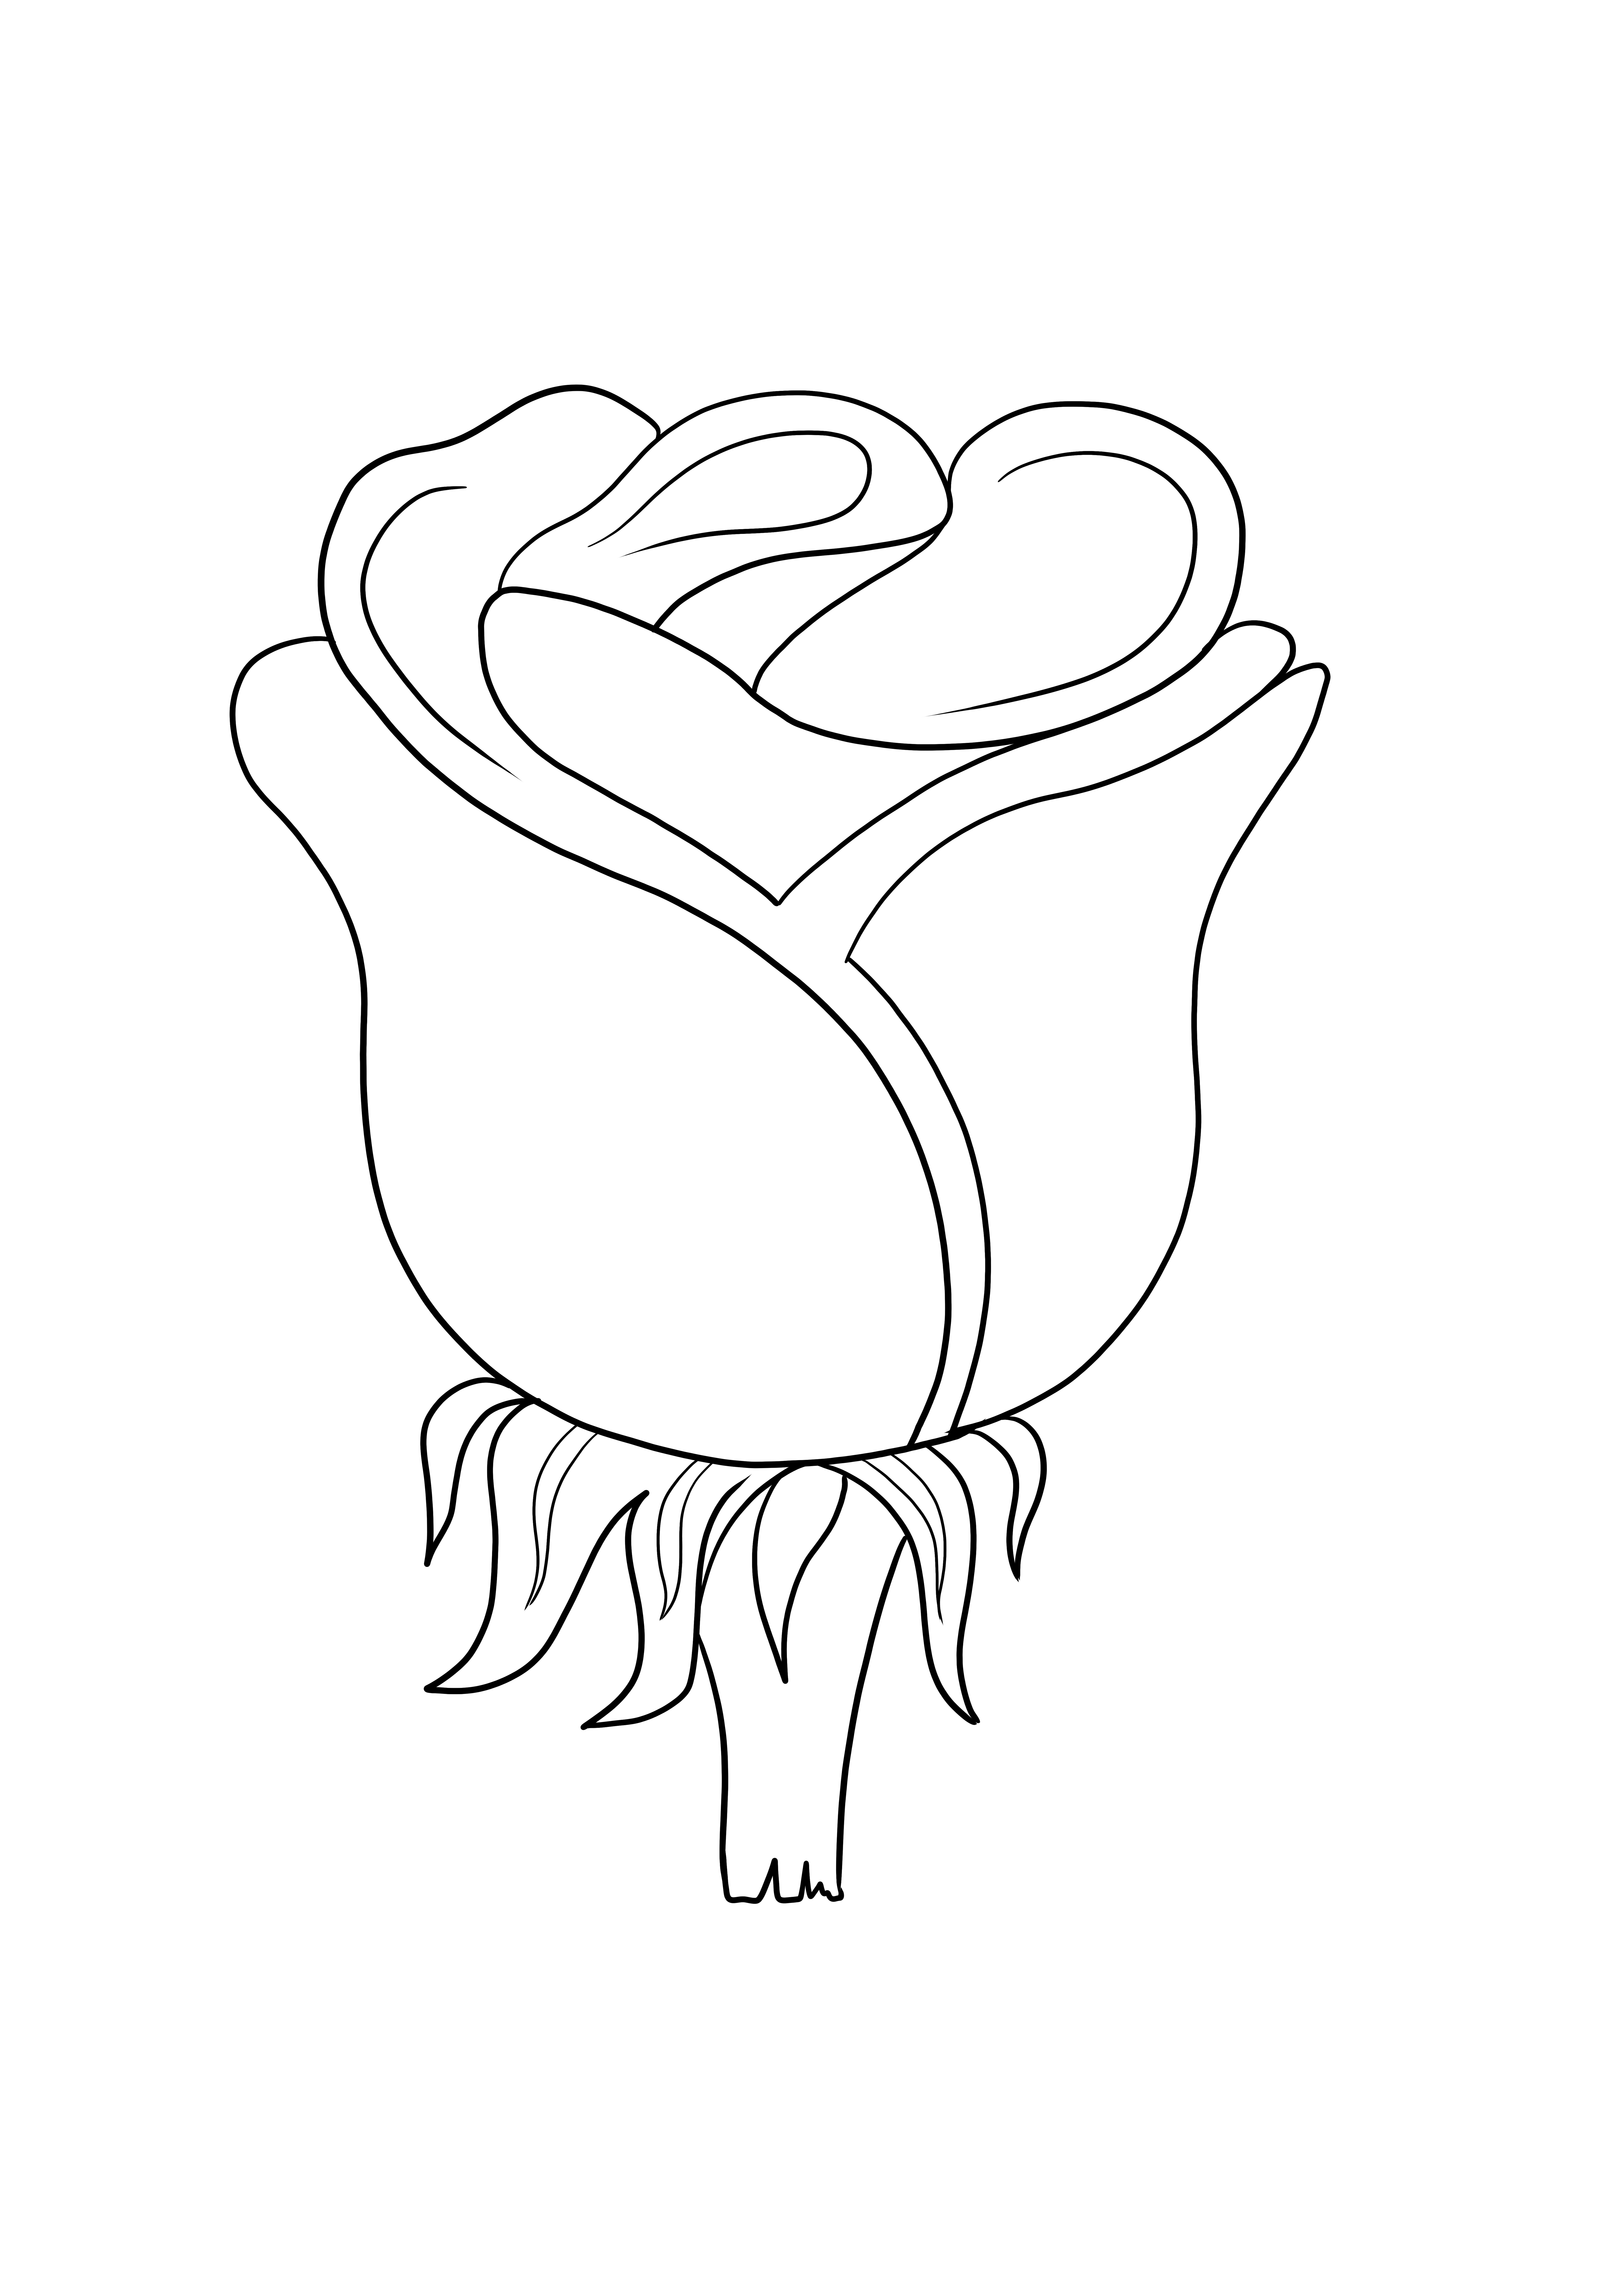 Coloring sheet of a rose button to download for free for kids